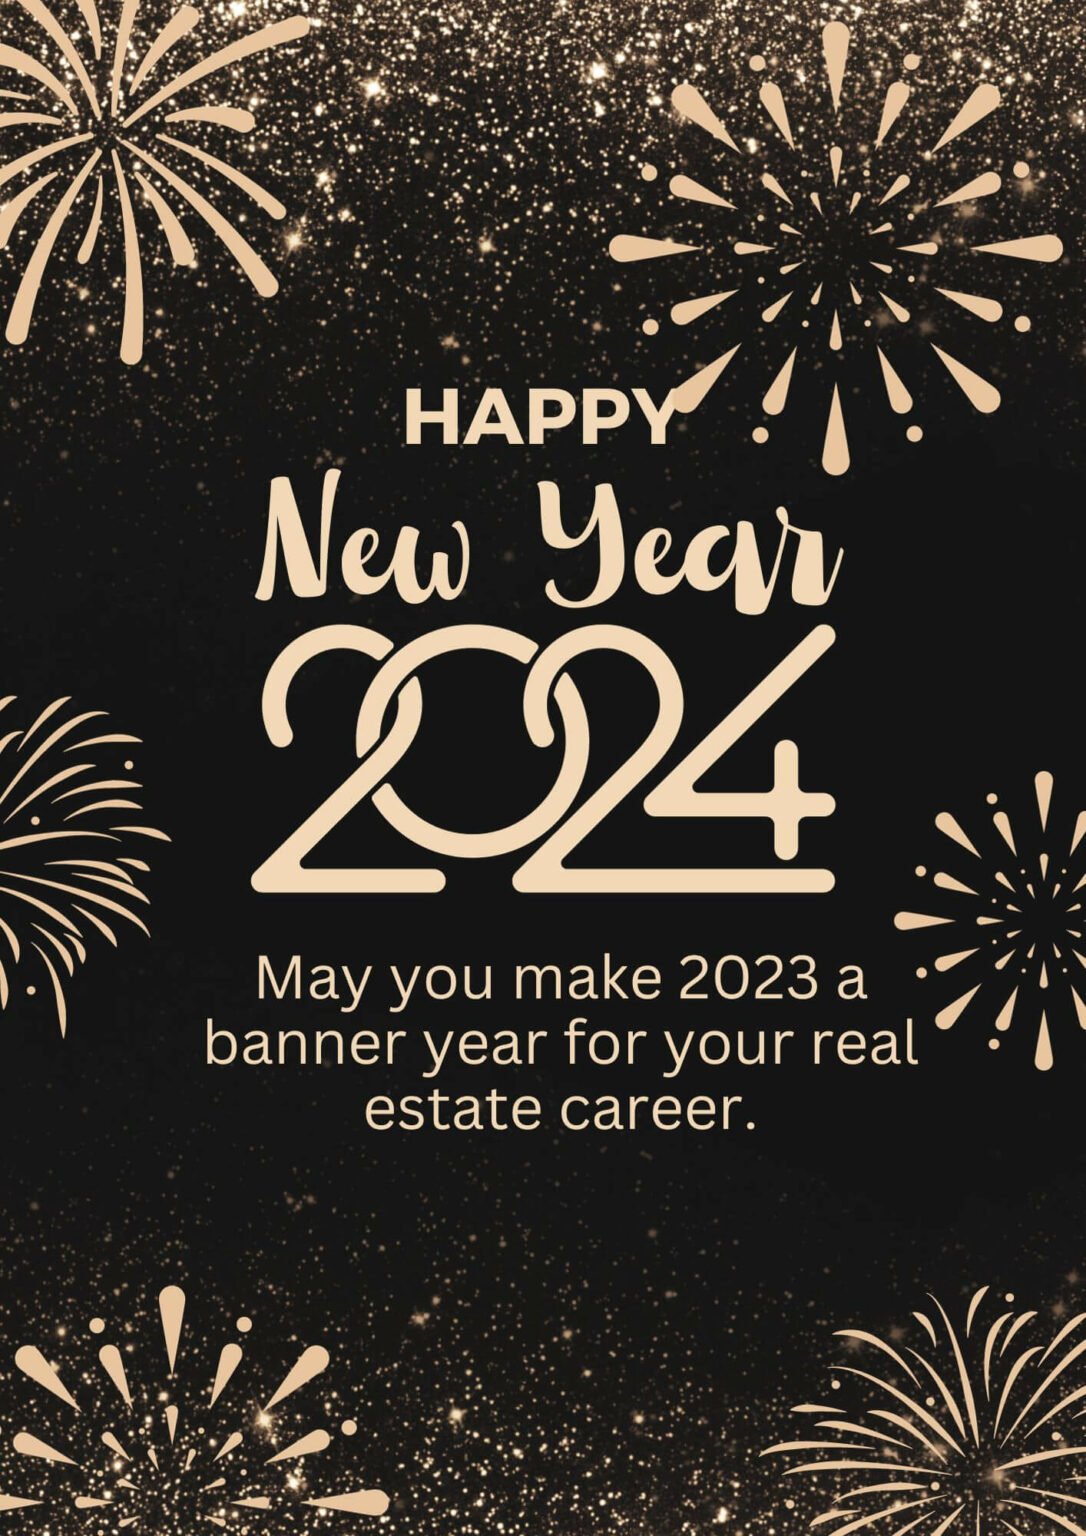 2024 Happy New Year Wishes For Real Estate 1086x1536 